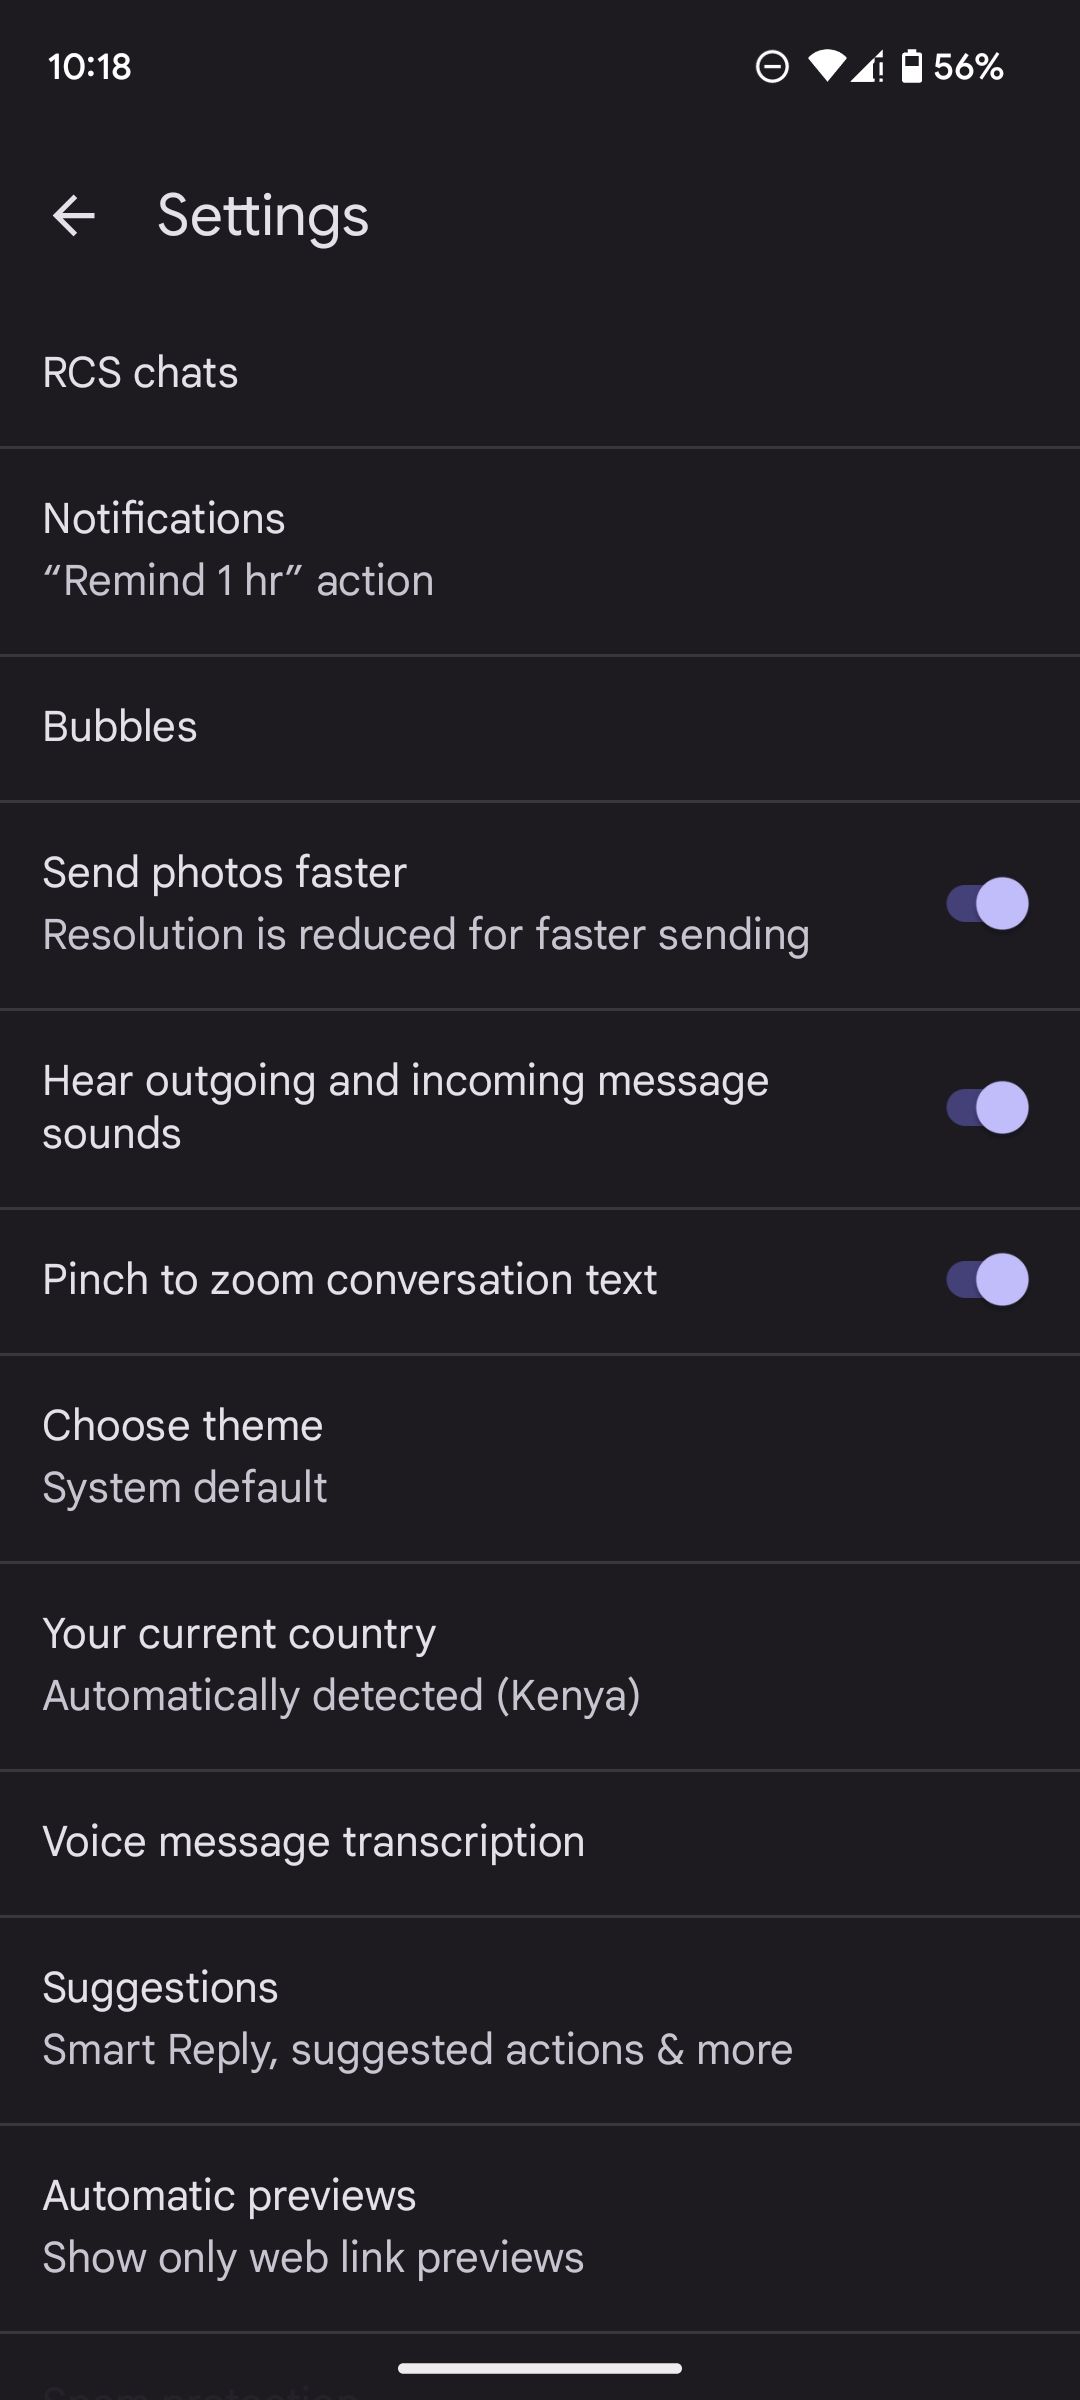 RCS chats option in Google Messages